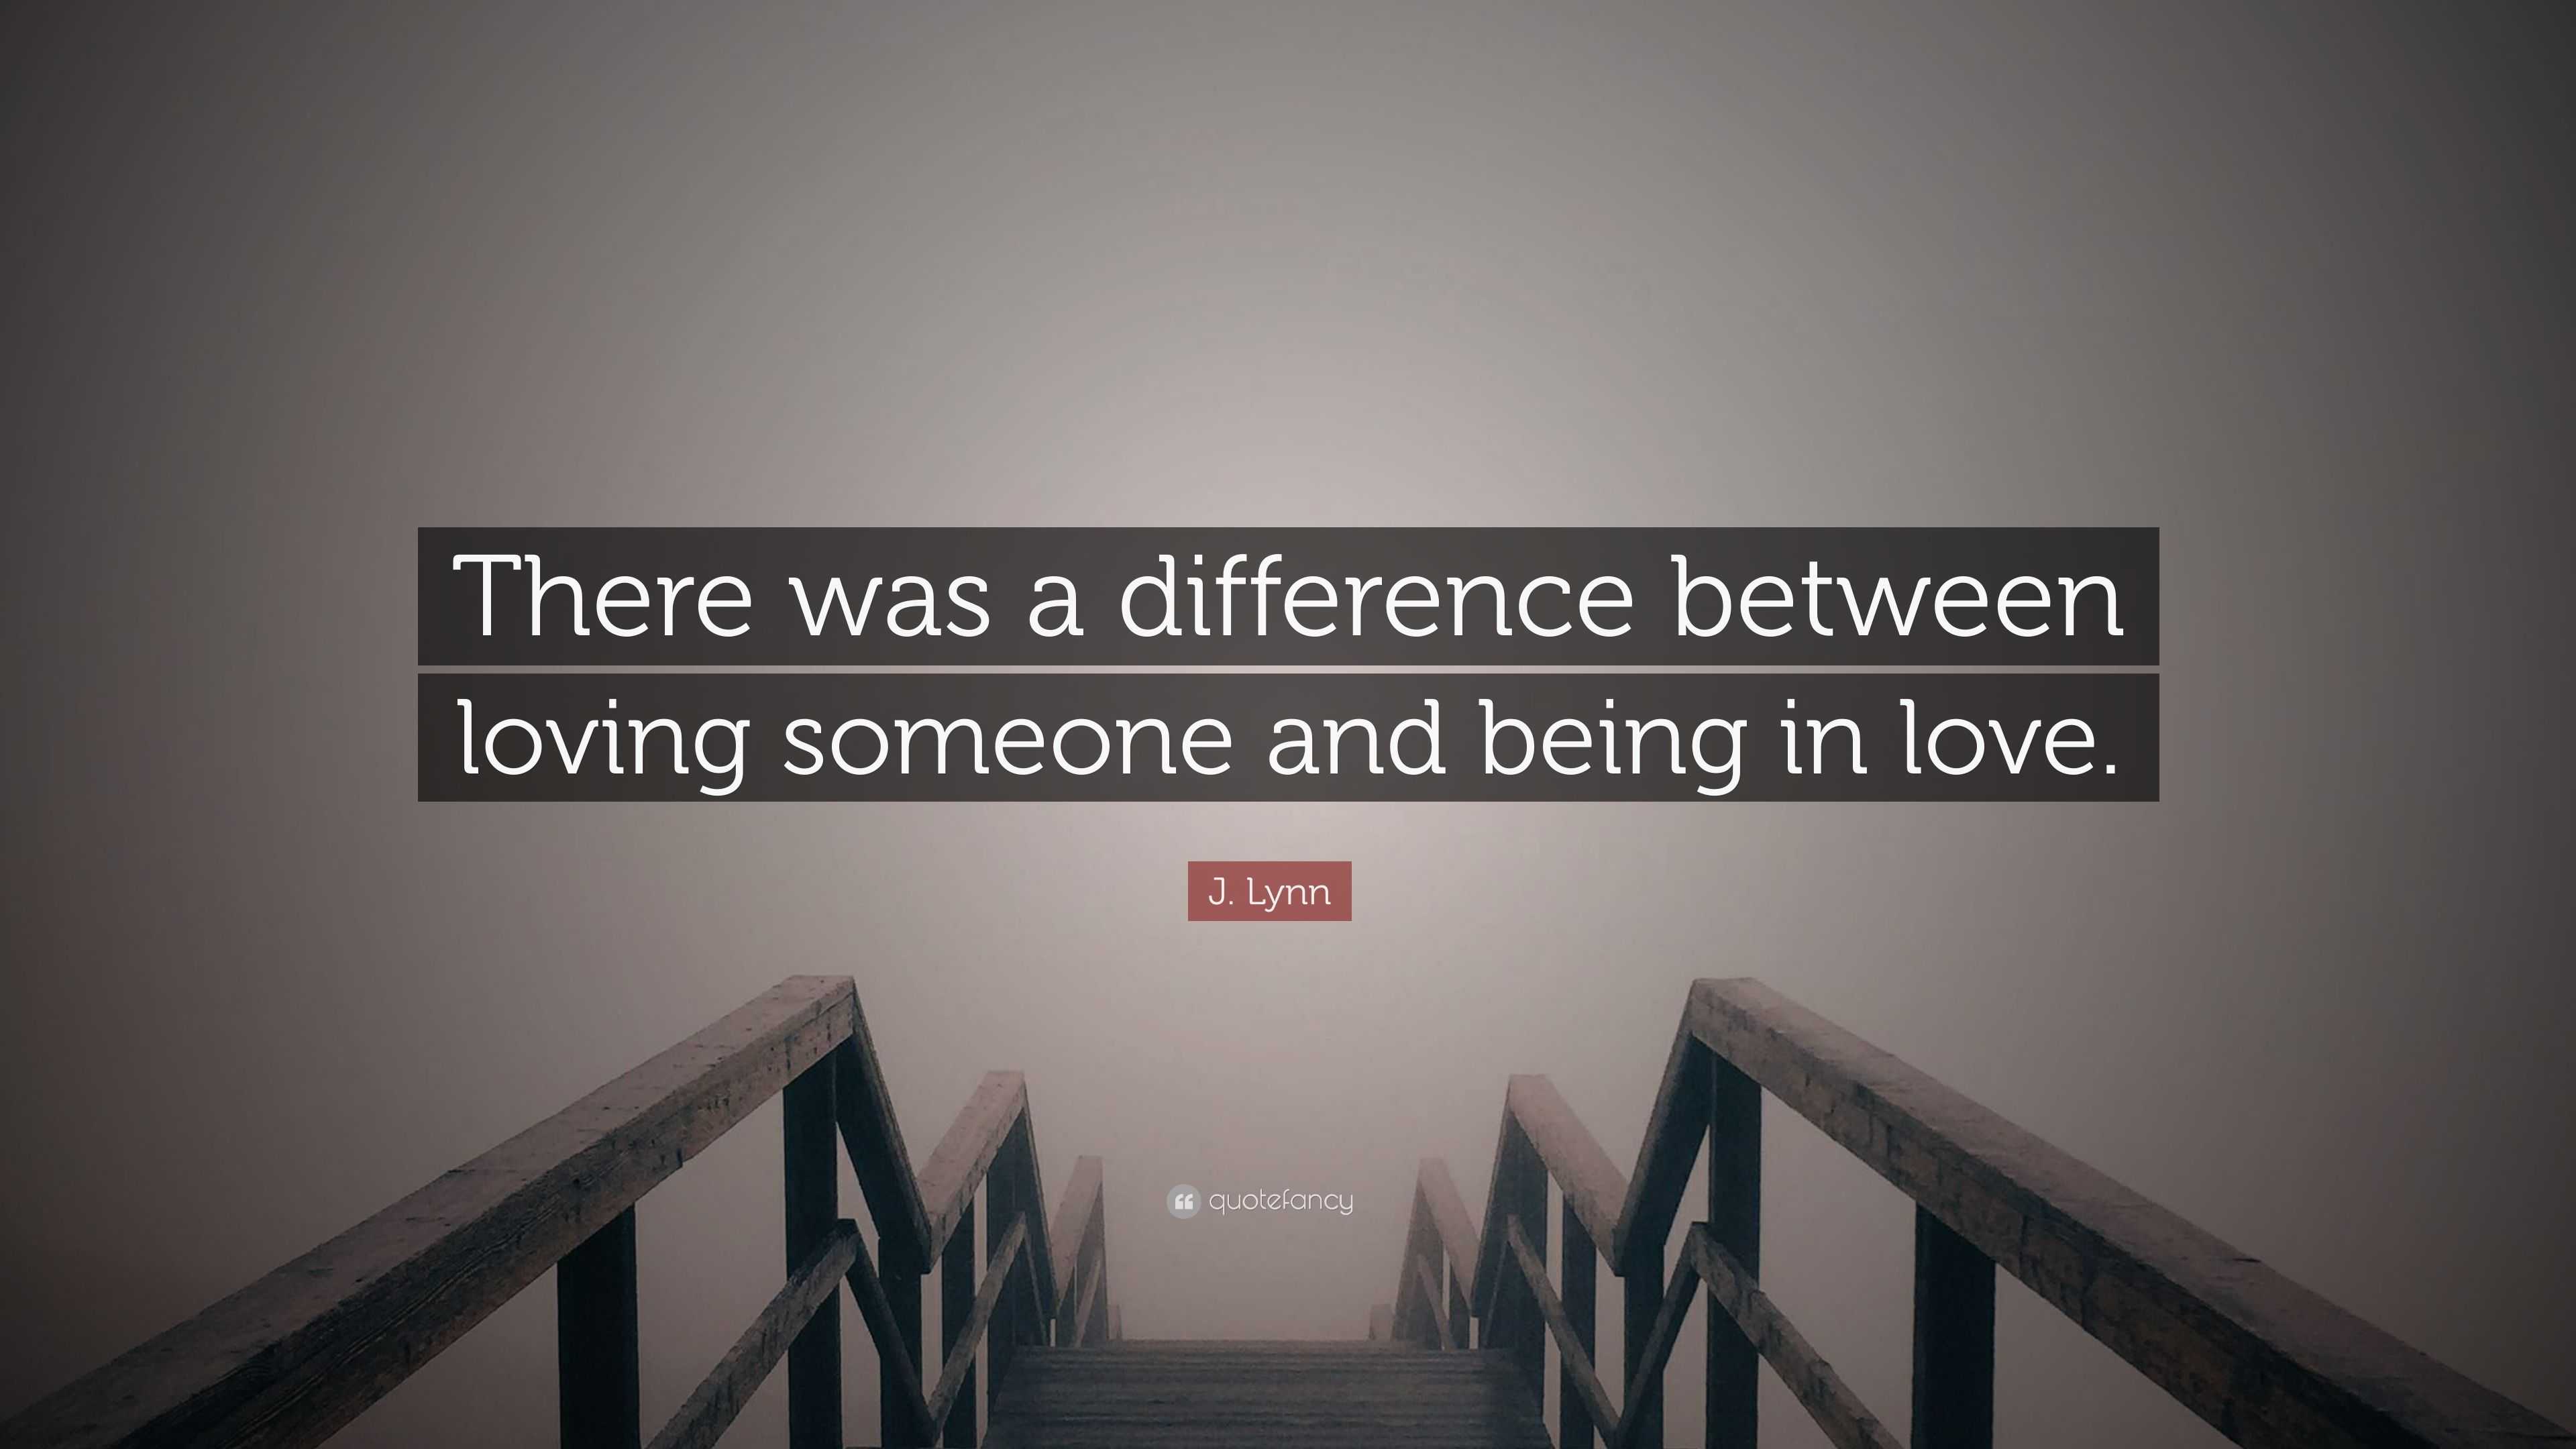 J Lynn Quote “There was a difference between loving someone and being in